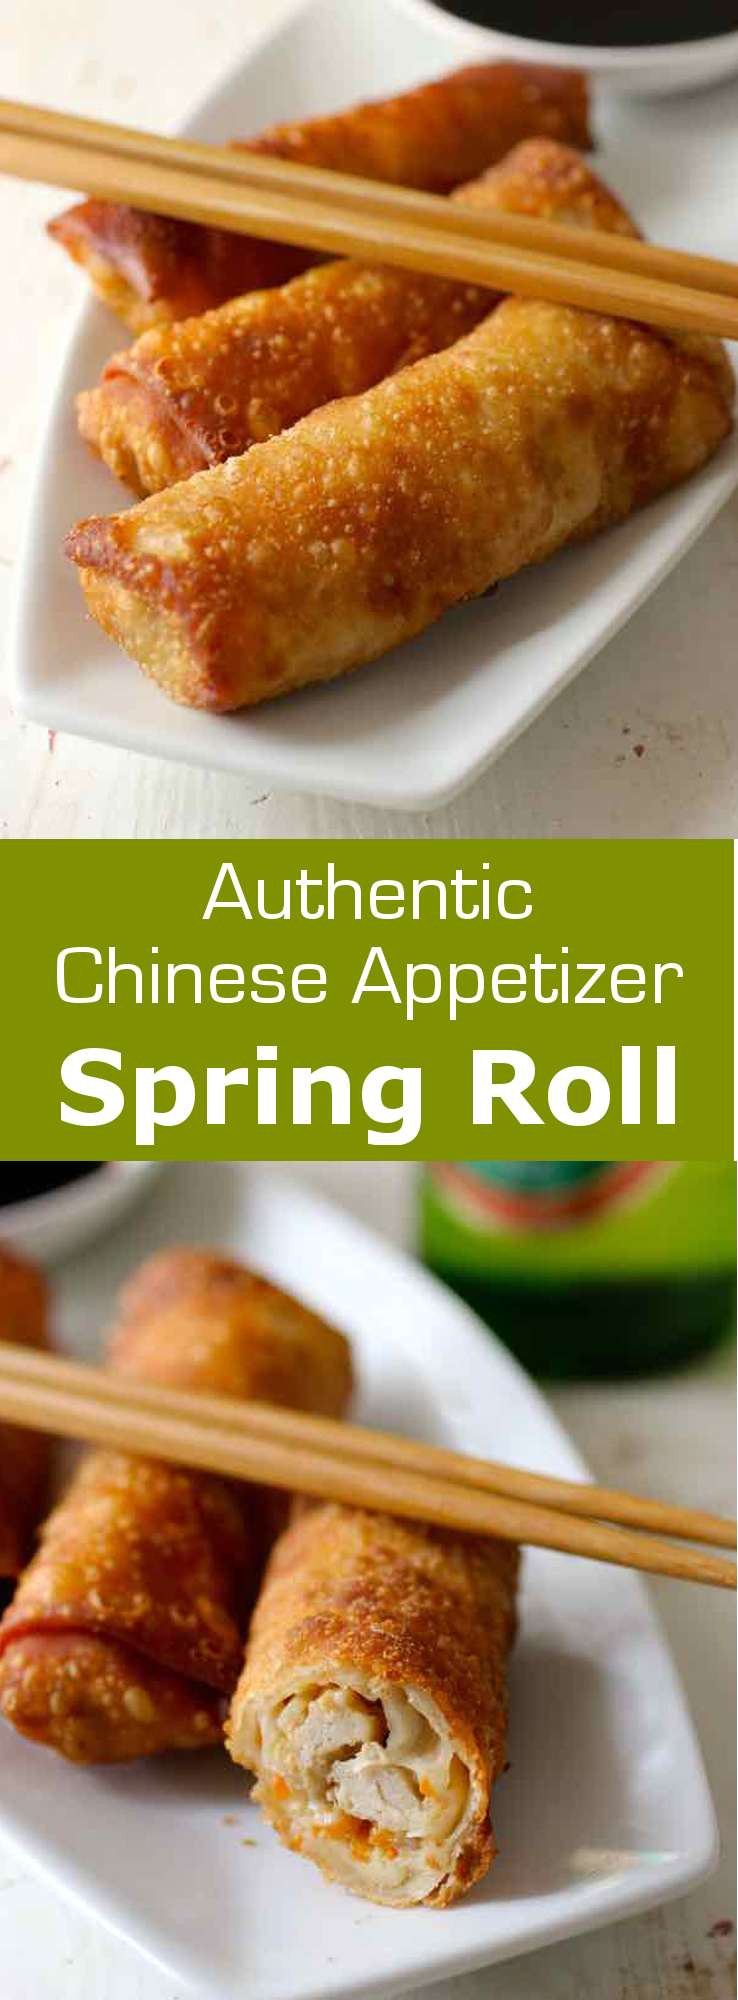 Asian Spring Roll Recipes
 Spring Rolls Authentic Chinese Recipe